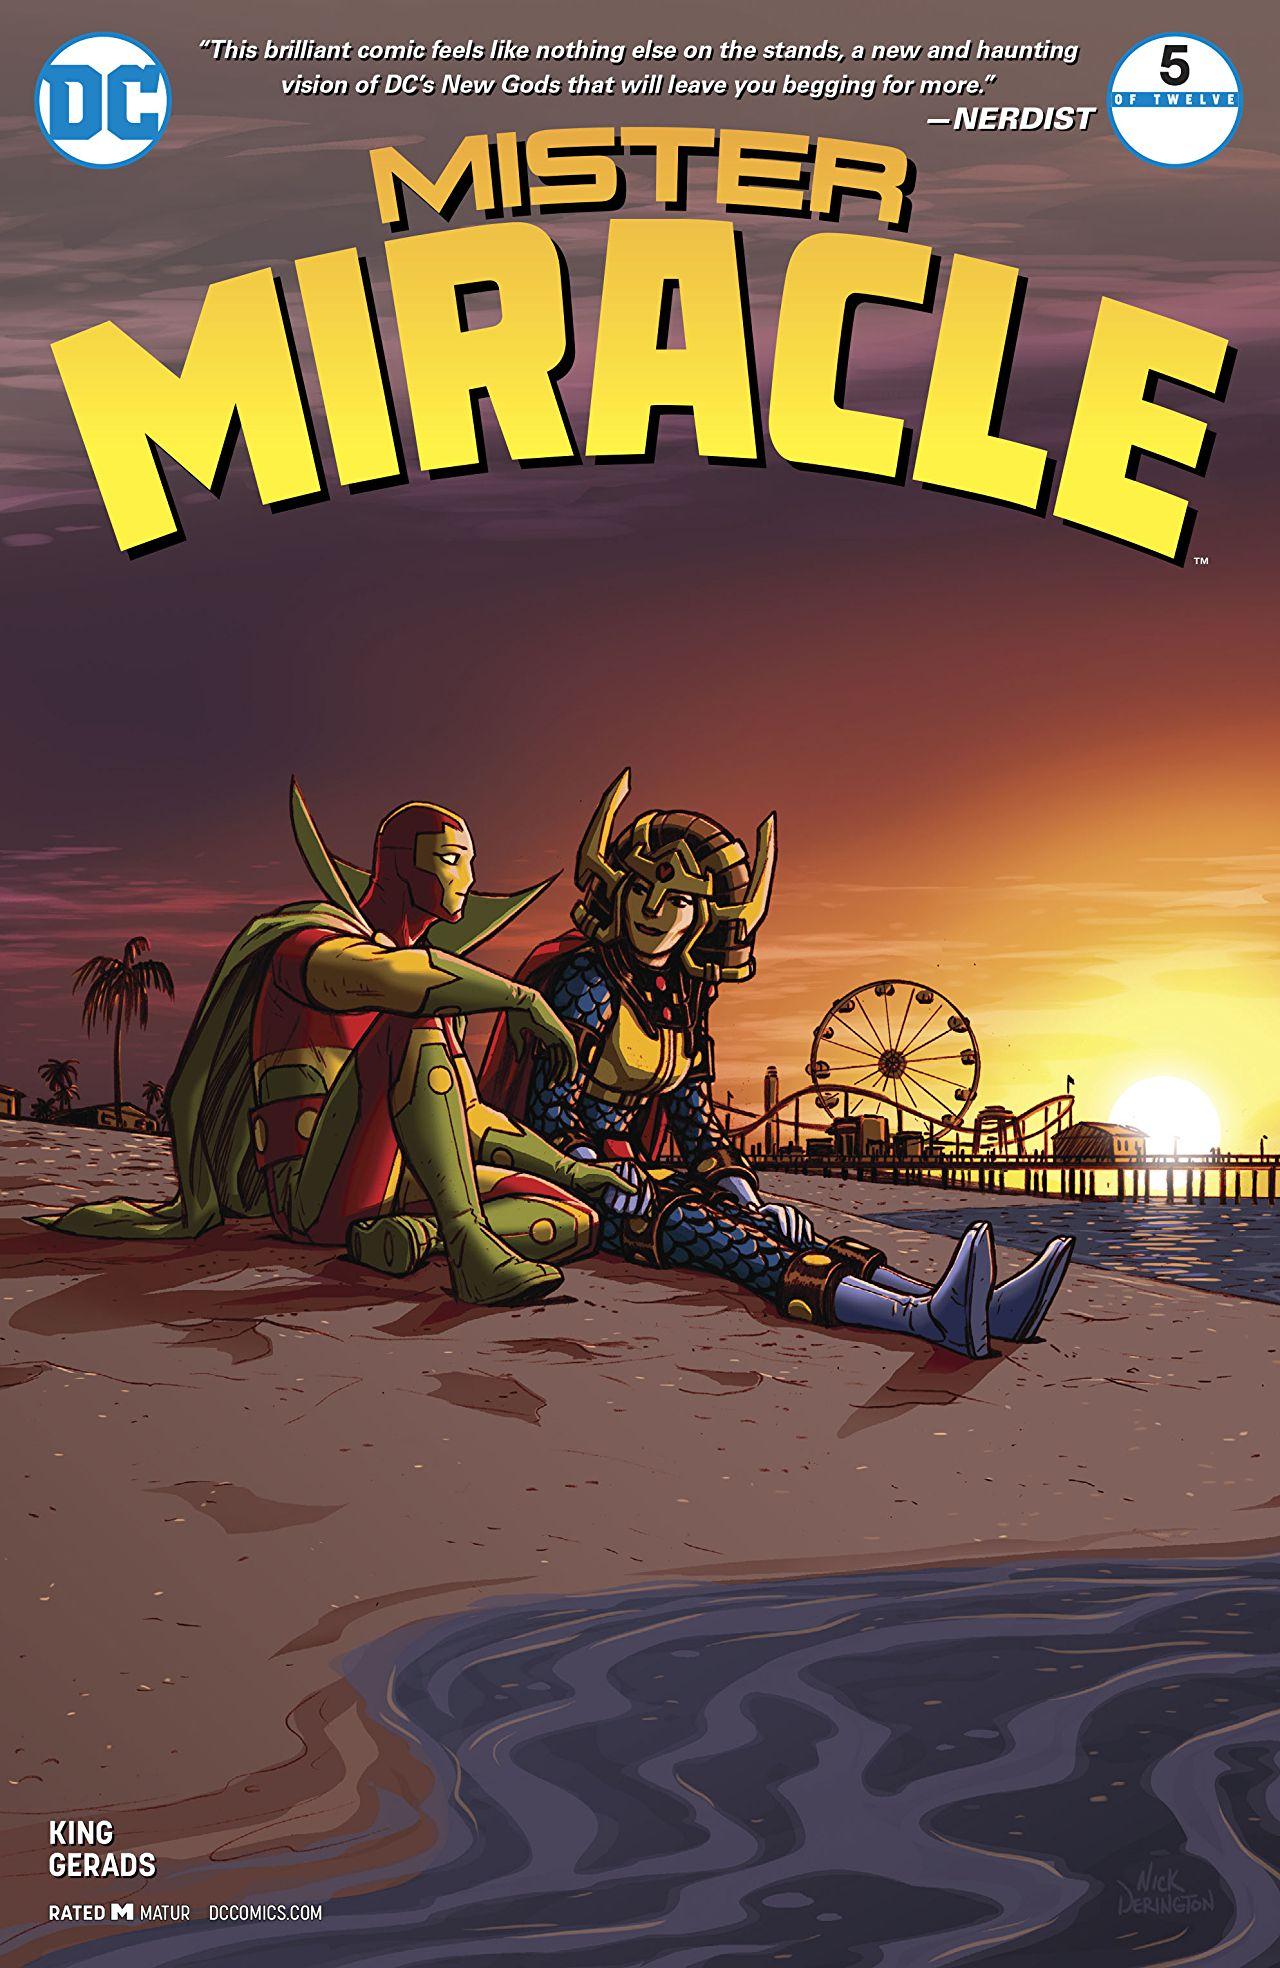 Mister Miracle Vol. 4 #5